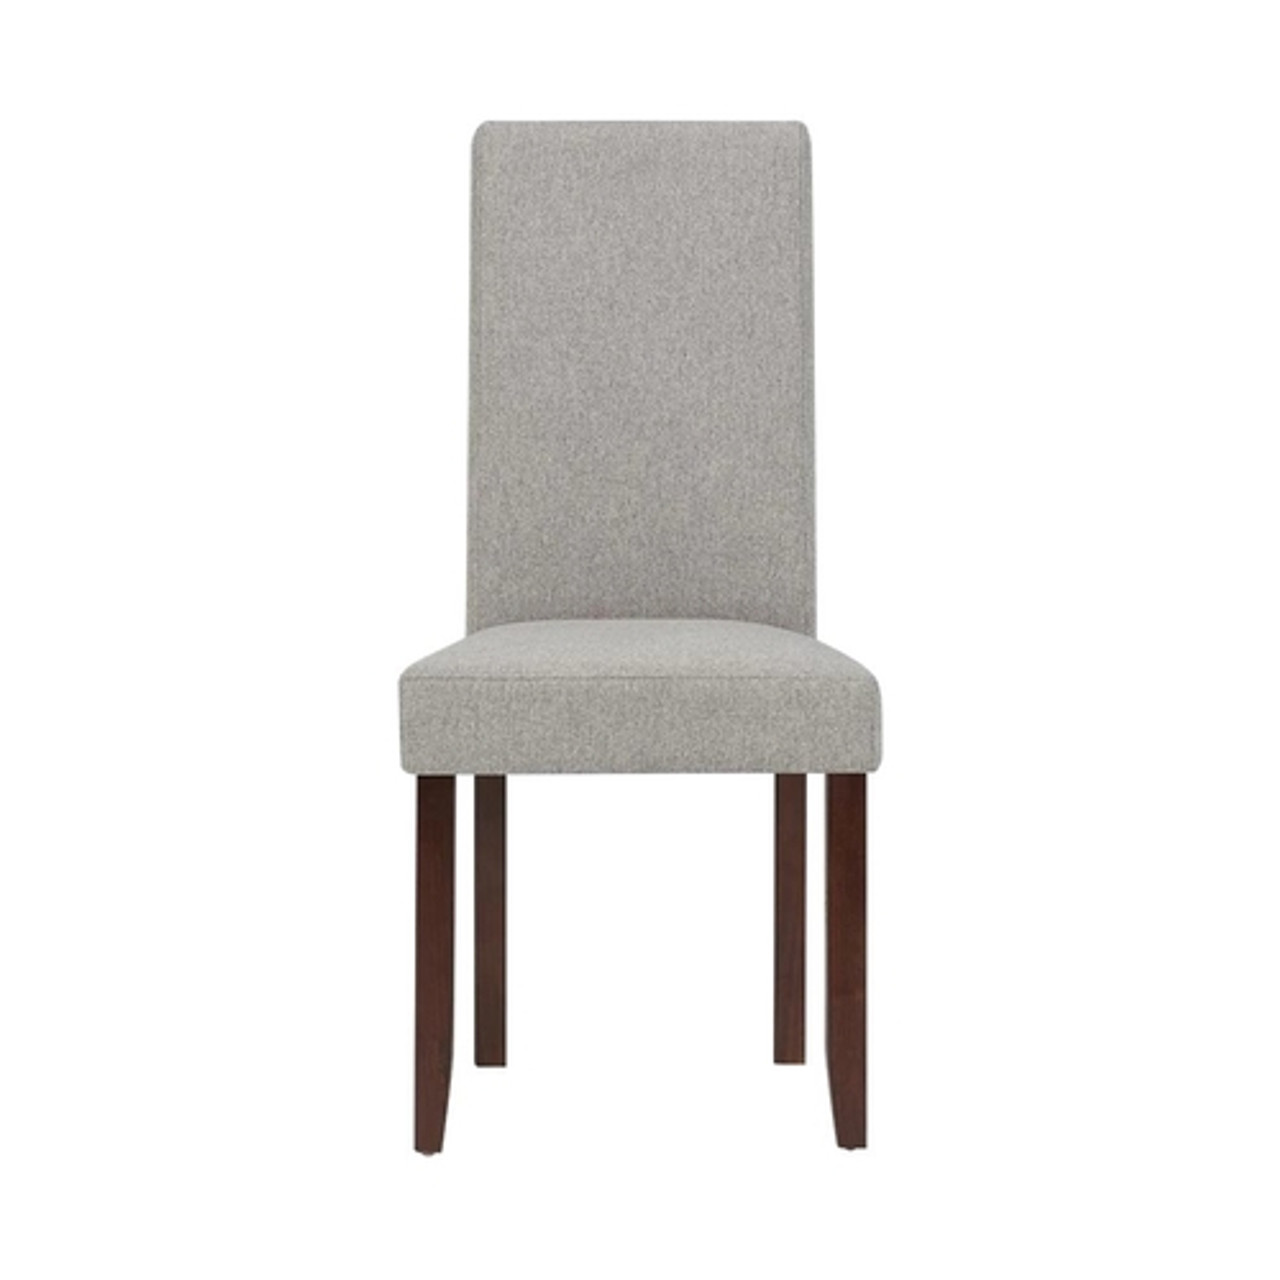 Simpli Home - Acadian Parson Contemporary High-Density Foam & Linen-Look Polyester Dining Chairs (Set of 2) - Gray Cloud